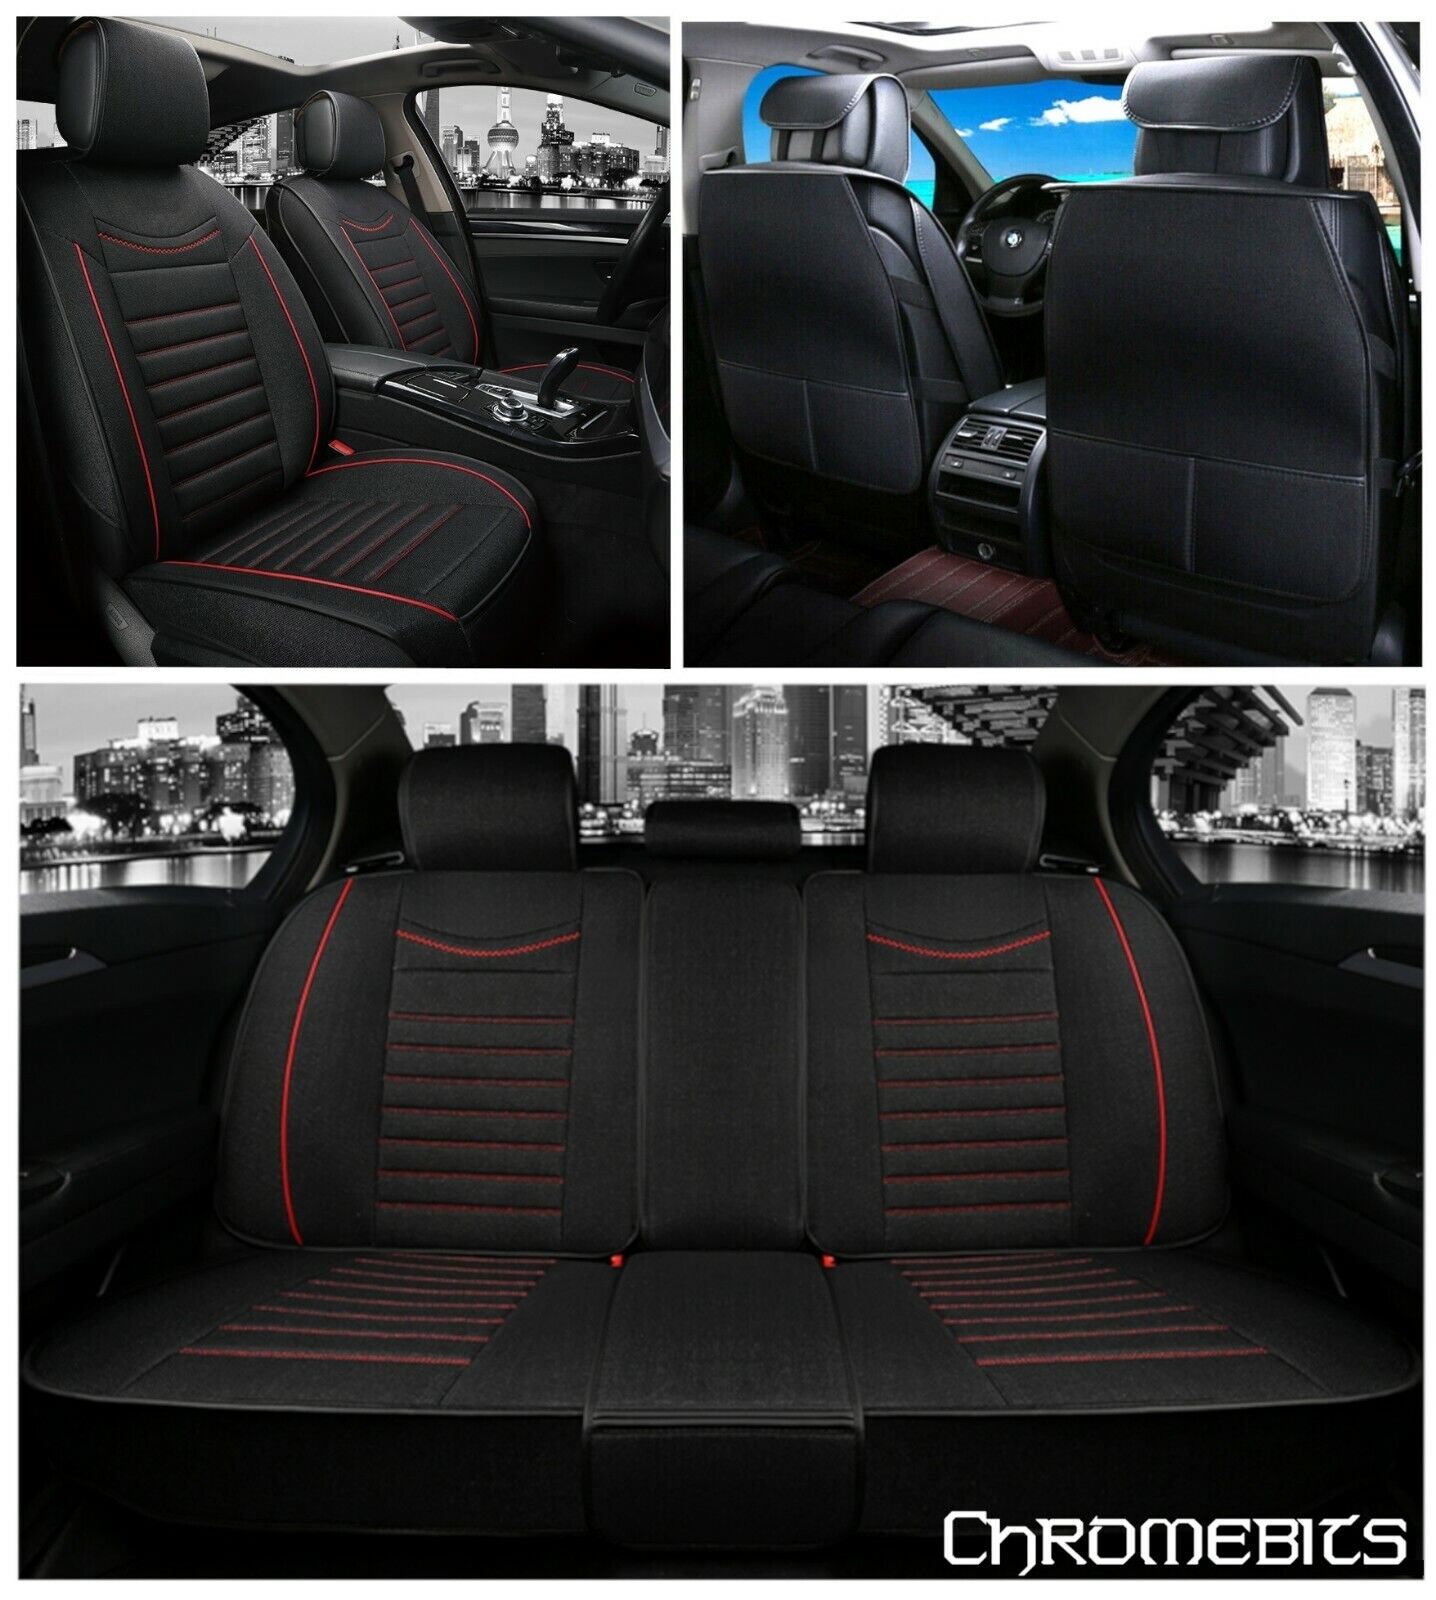 Premium Black Red Fabric Full Set Seat Covers For Land Range Rover Discovery